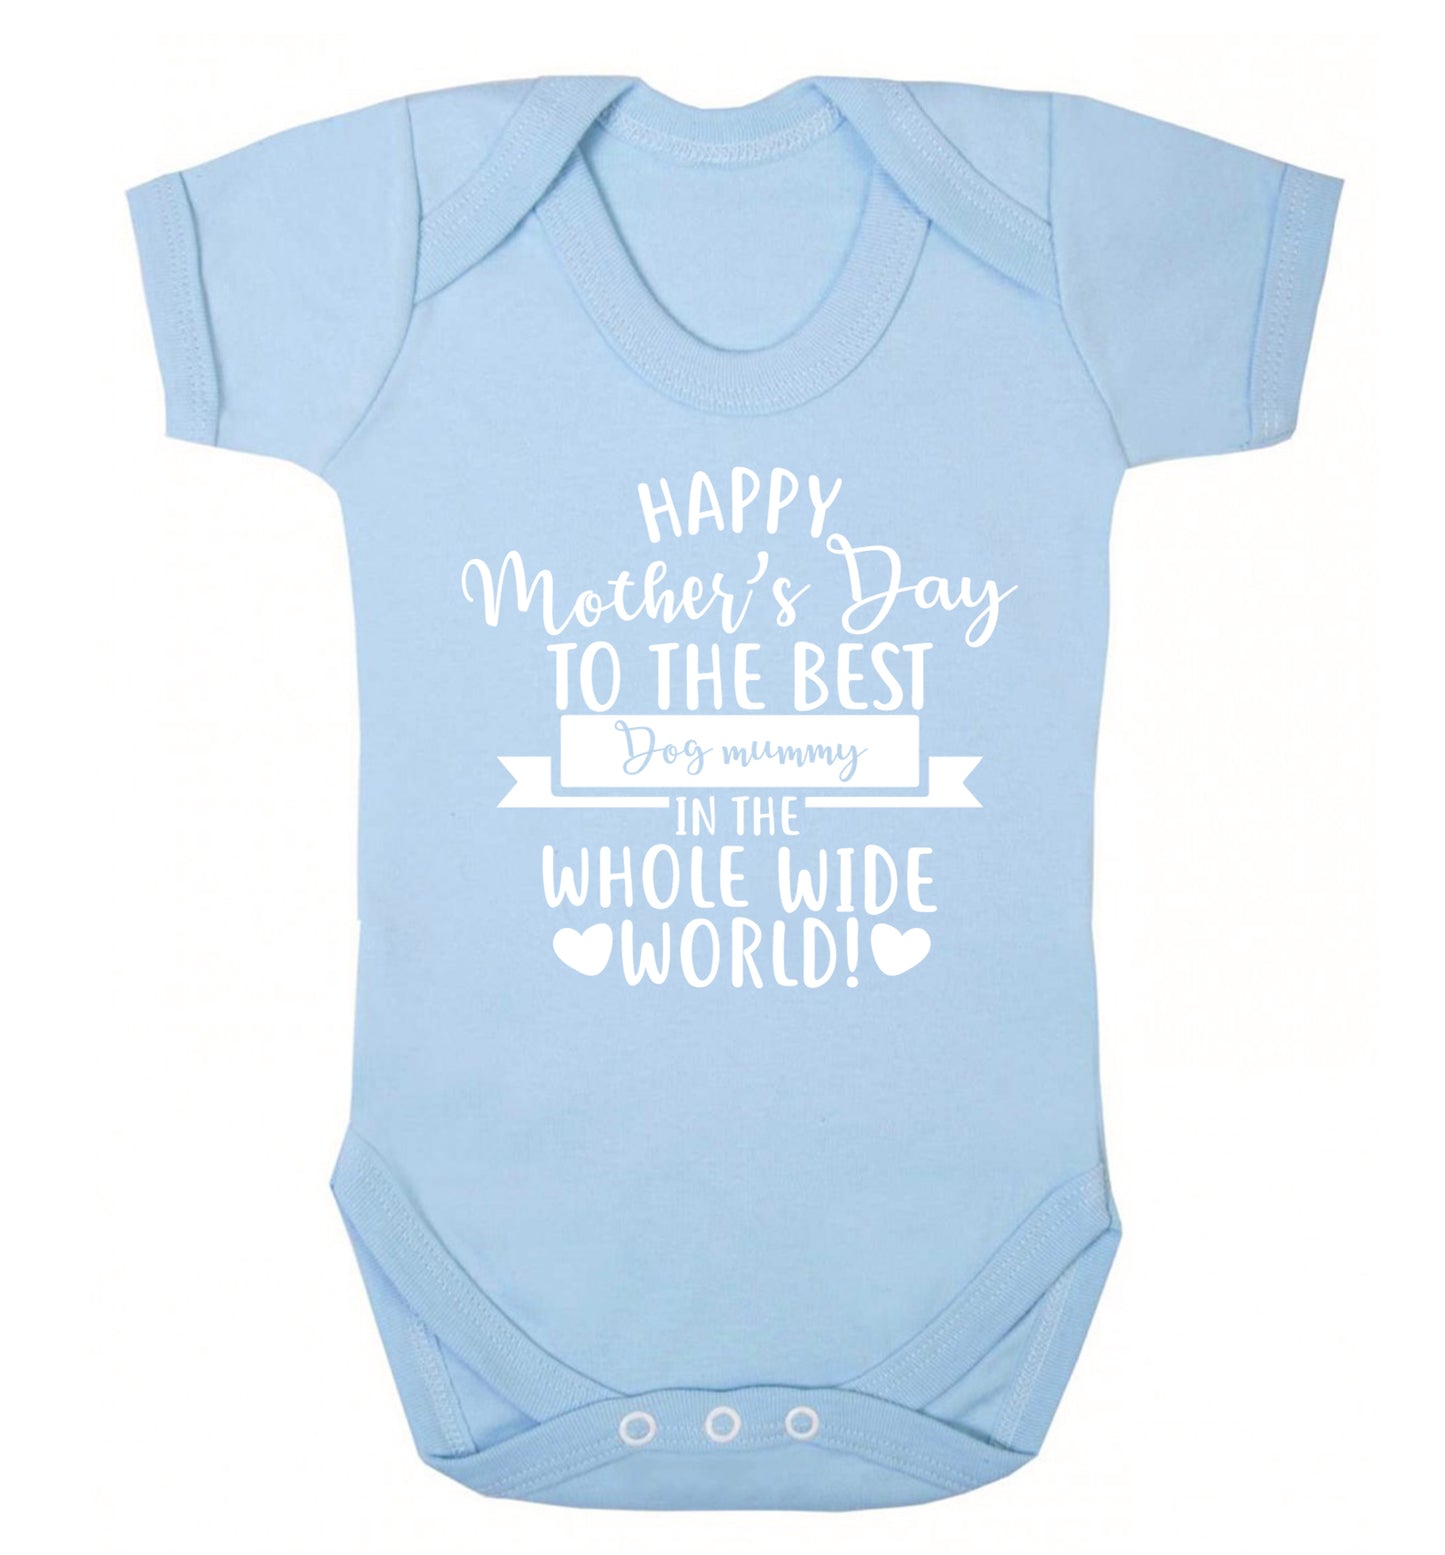 Happy mother's day to the best dog mummy in the world Baby Vest pale blue 18-24 months